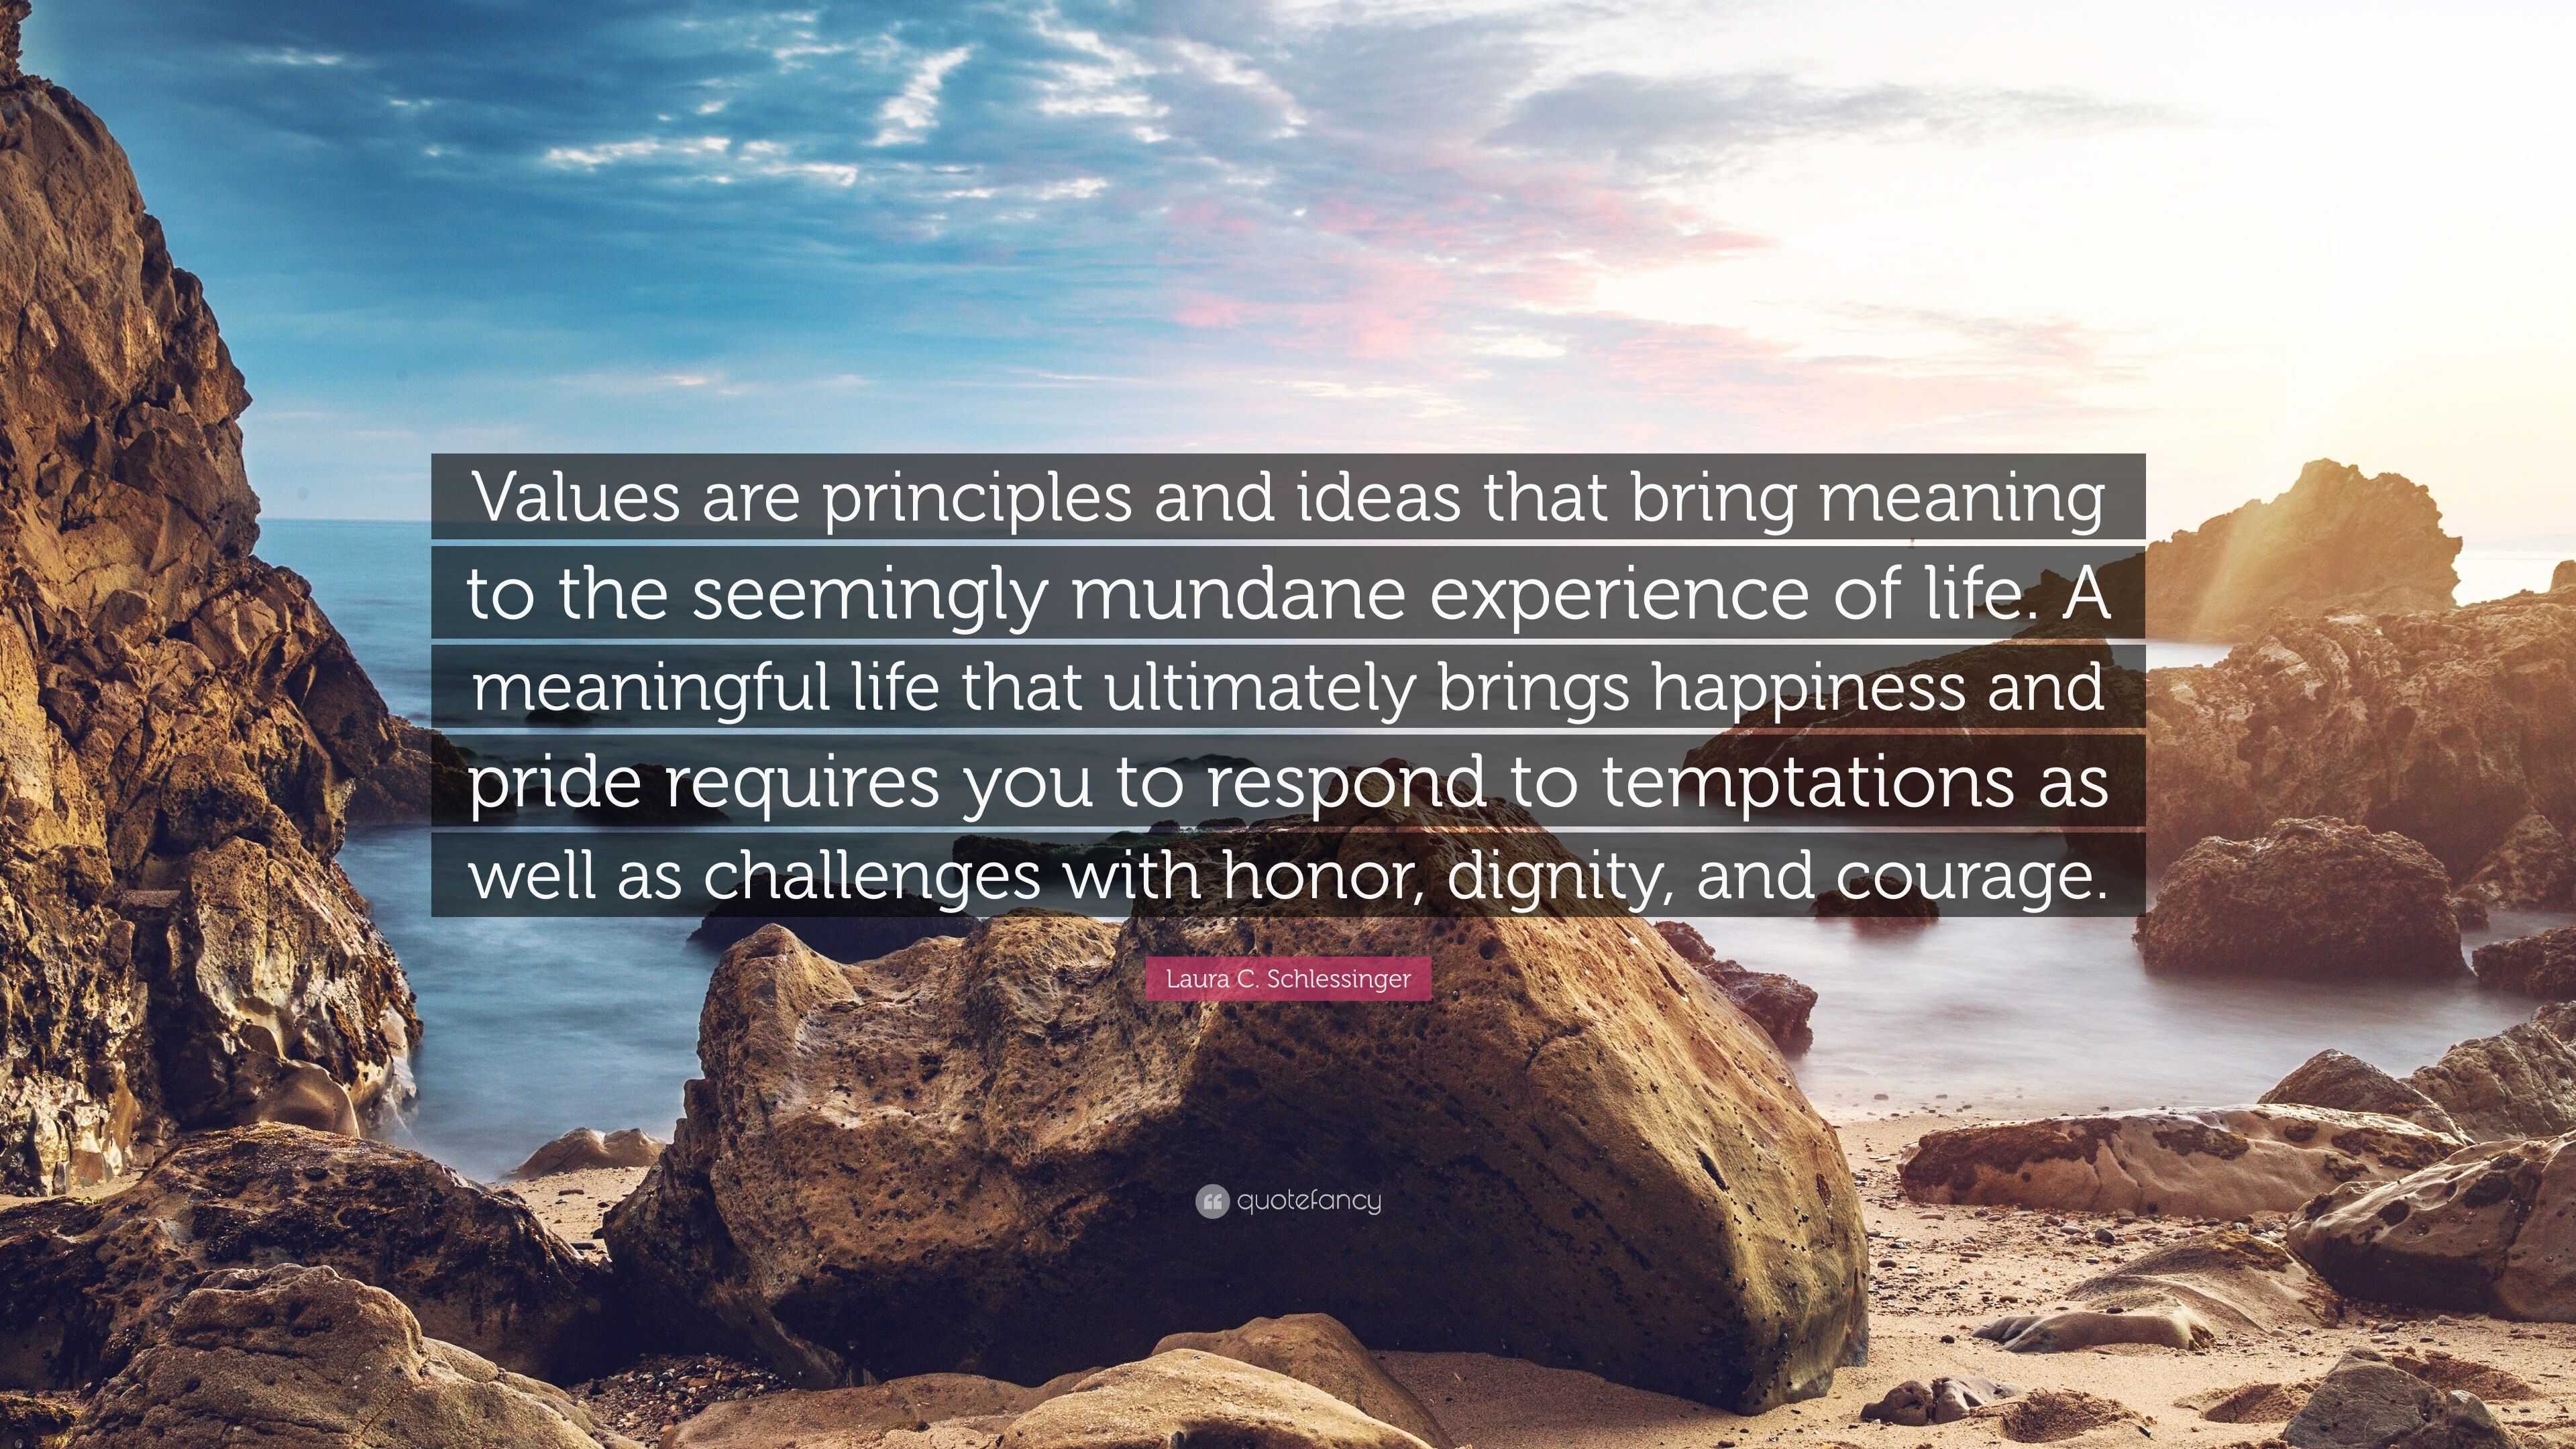 Laura C Schlessinger Quote “Values are principles and ideas that bring meaning to